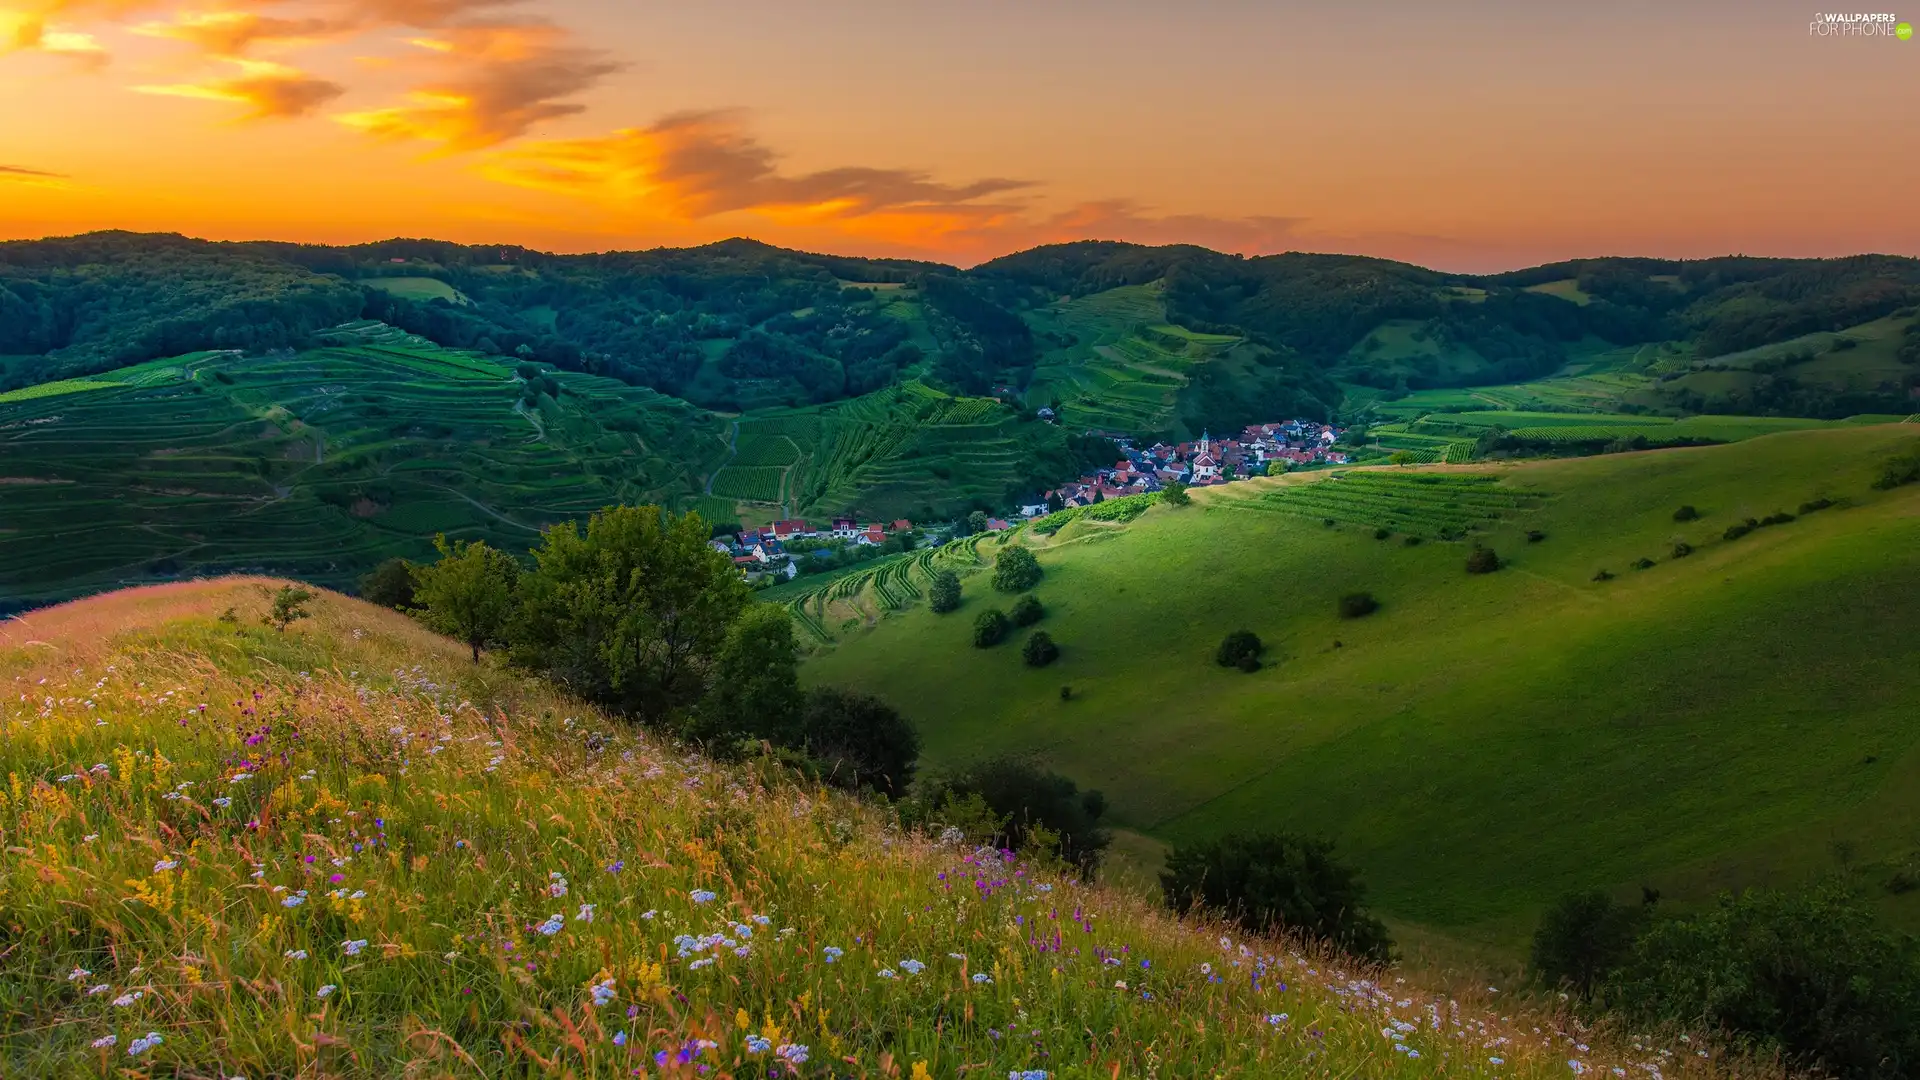 trees, car in the meadow, Valley, Sky, Houses, The Hills, Flowers, Great Sunsets, viewes, medows